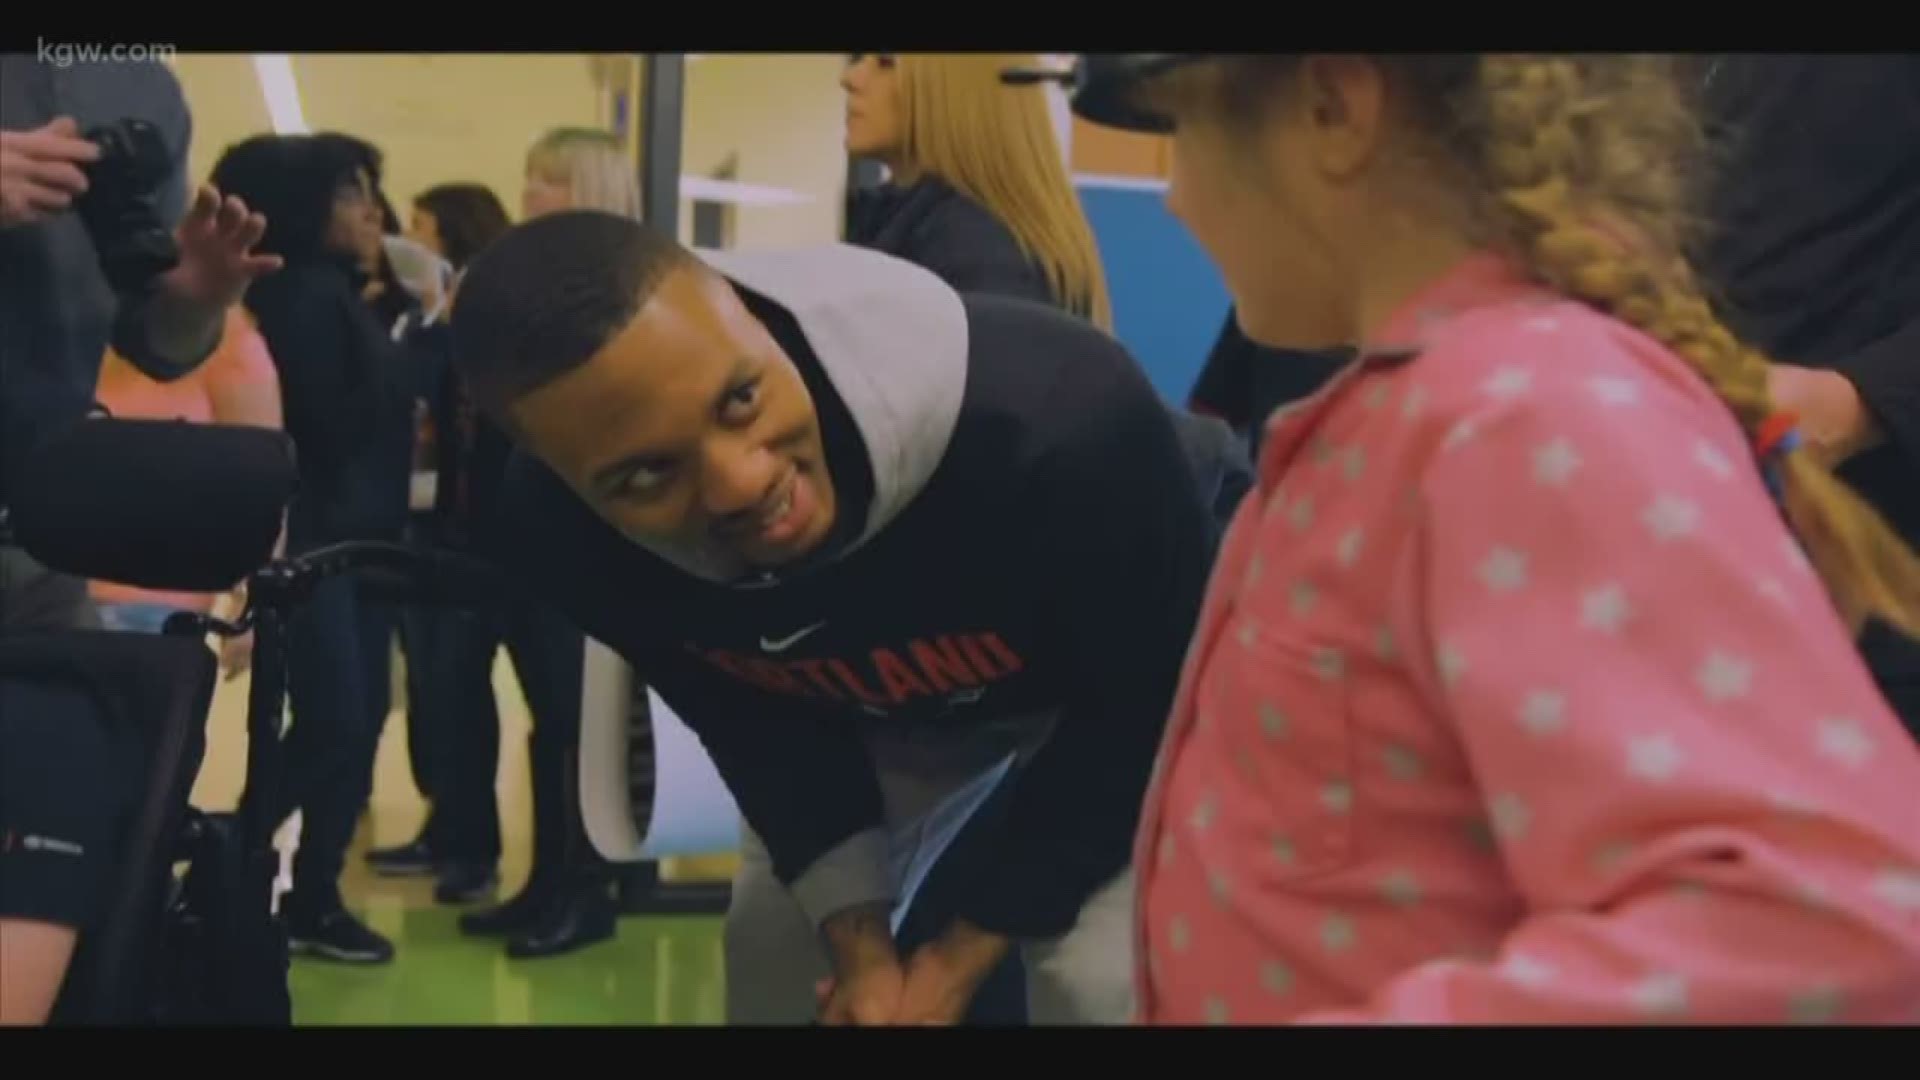 Students say Damian Lillard and the Blazers are good, respectful role models.